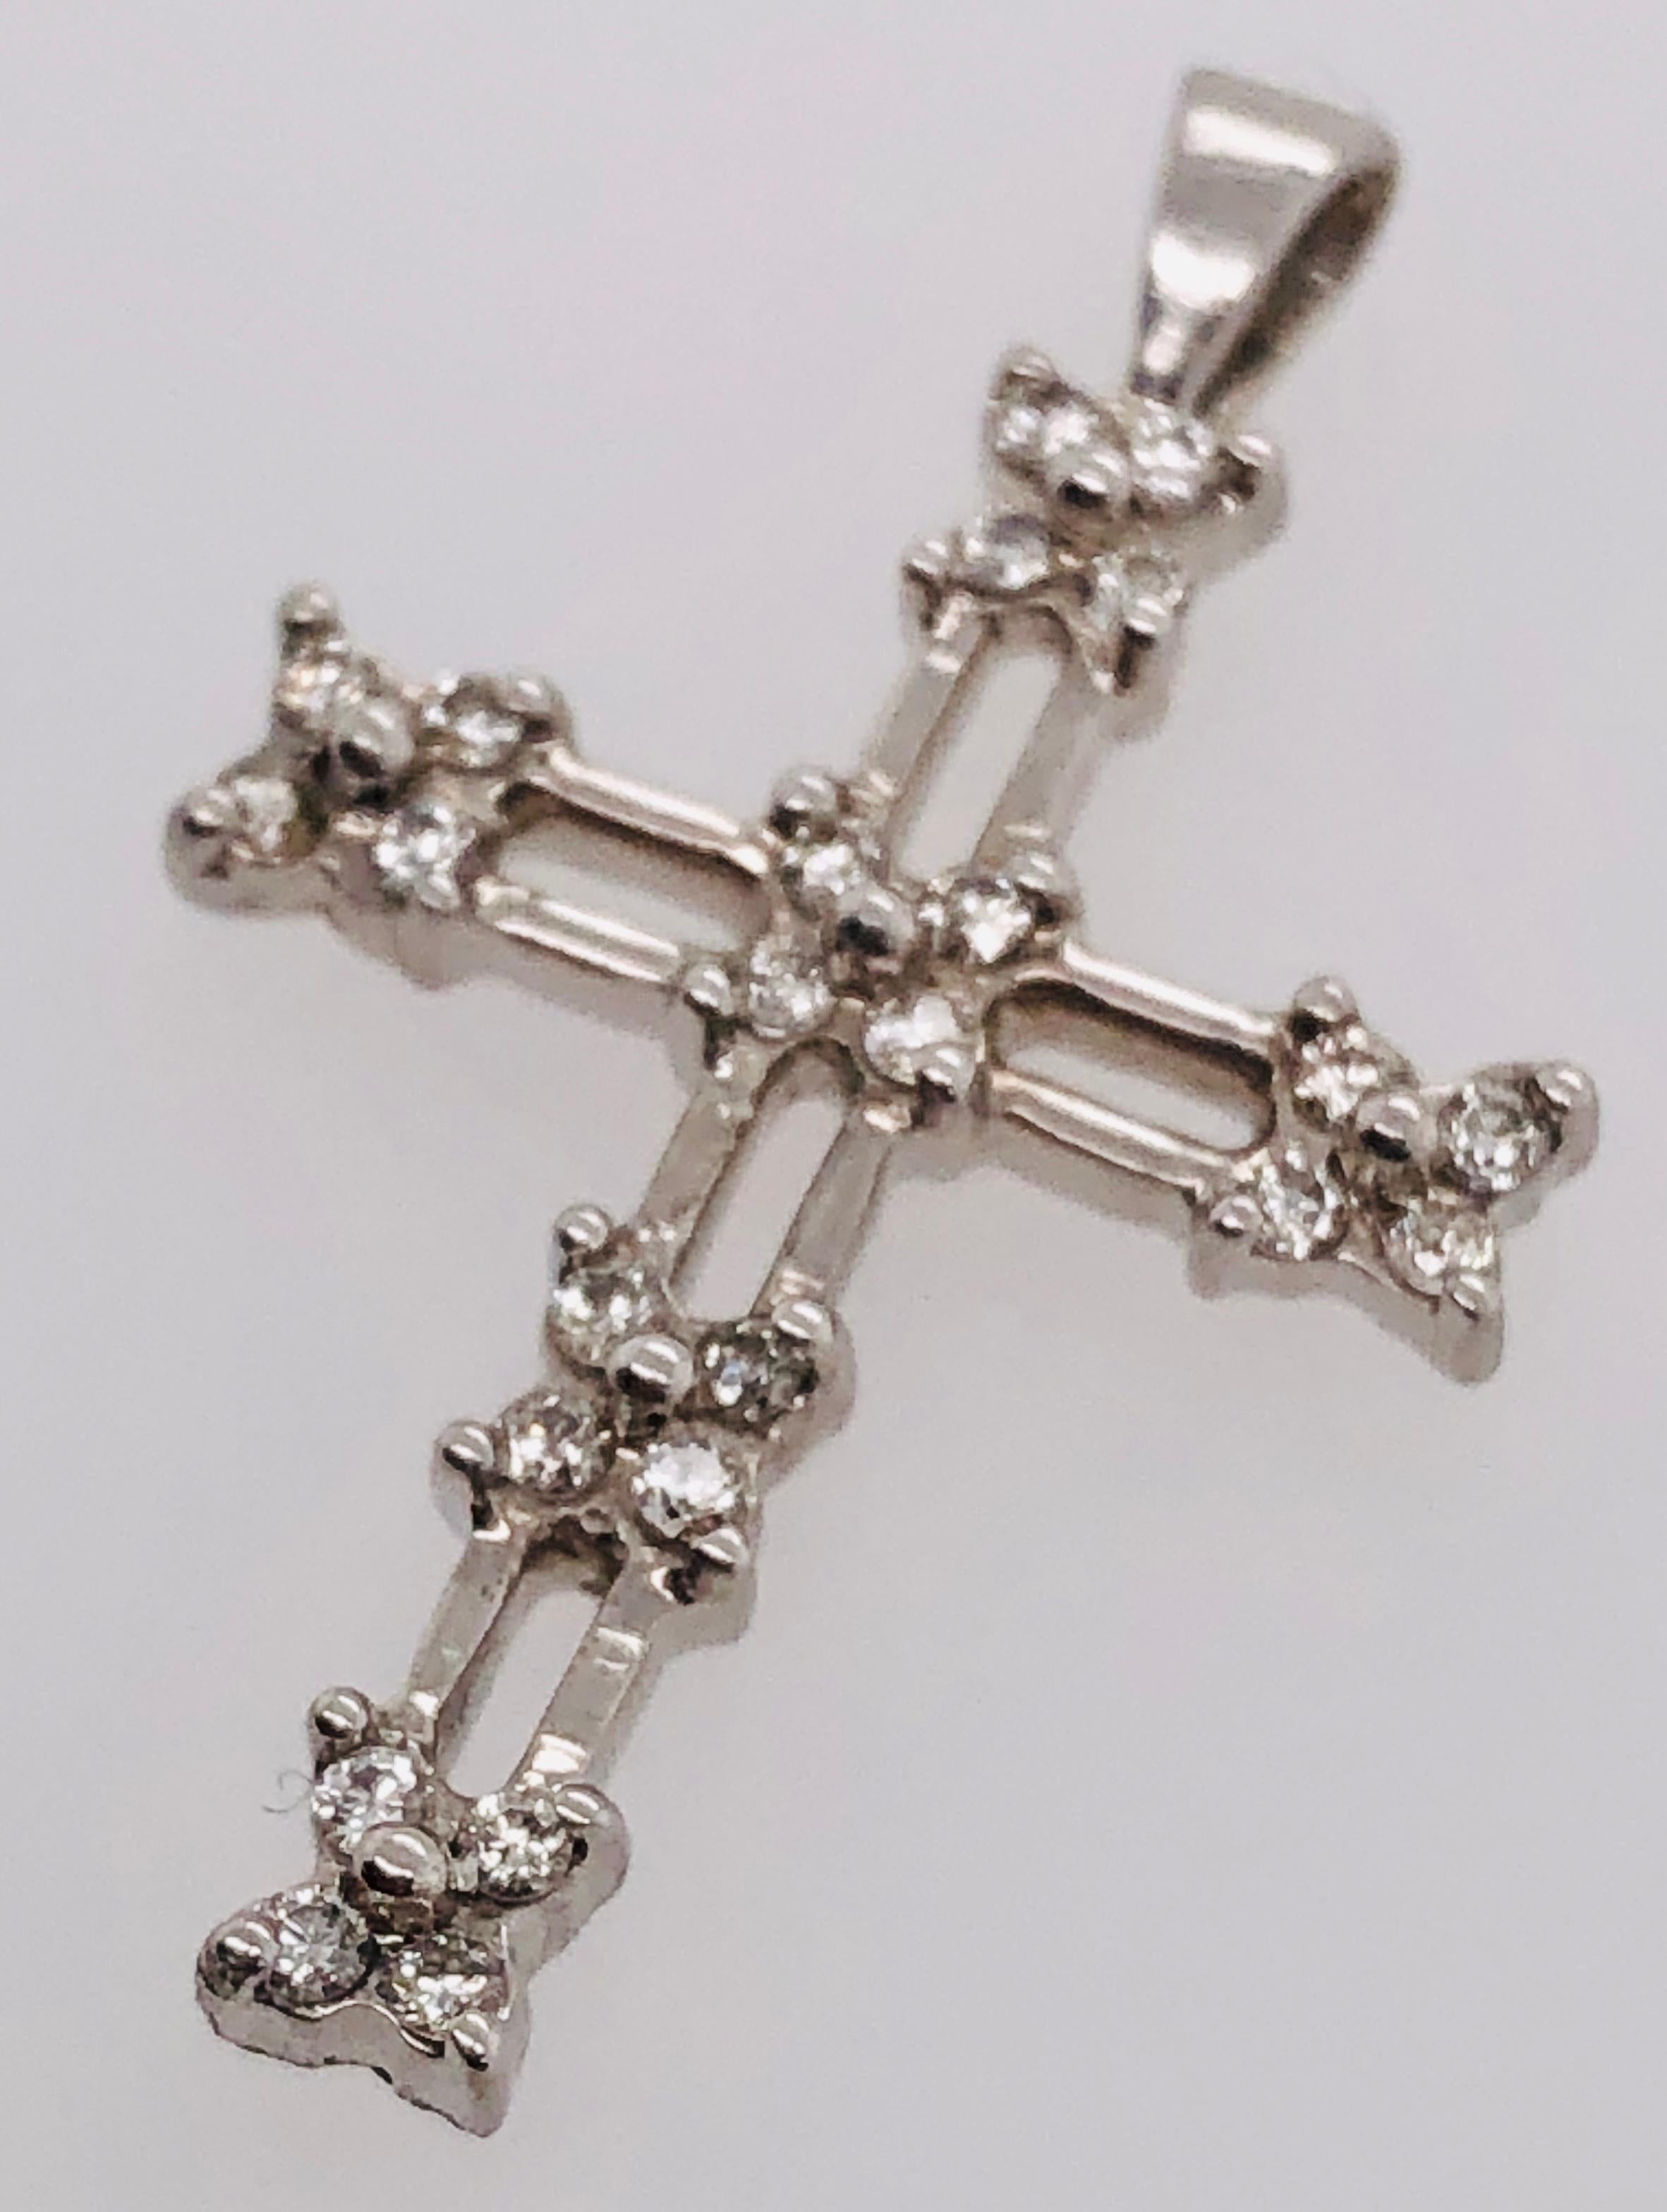 !4Kt White Gold Cross Pendant with Diamond 0.25 Total Diamond Weight
1.96 grams total weight